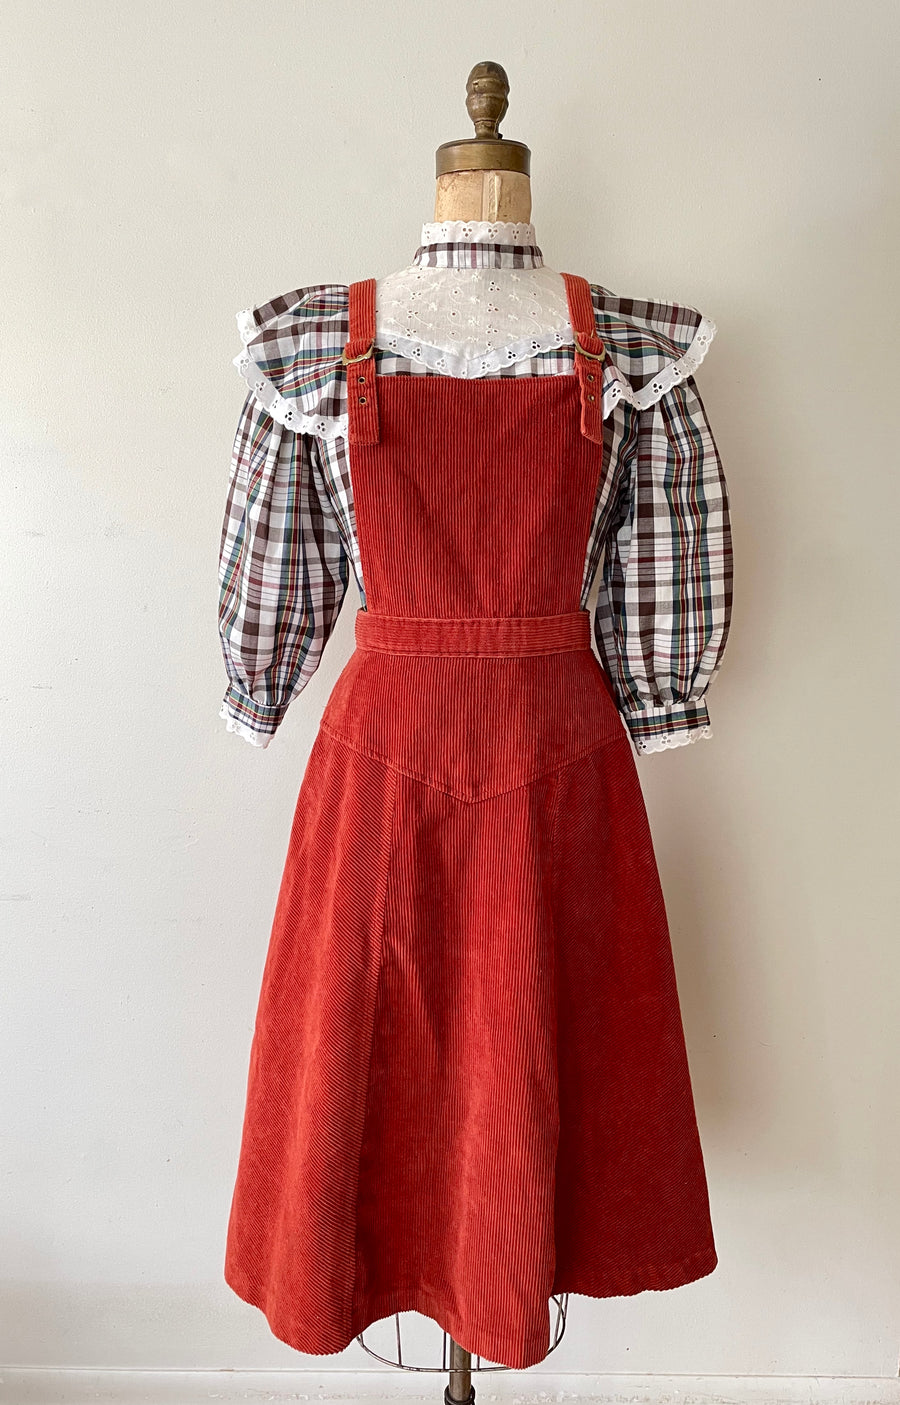 1970's Corduroy Jumper/Overall Dress - Size S/M